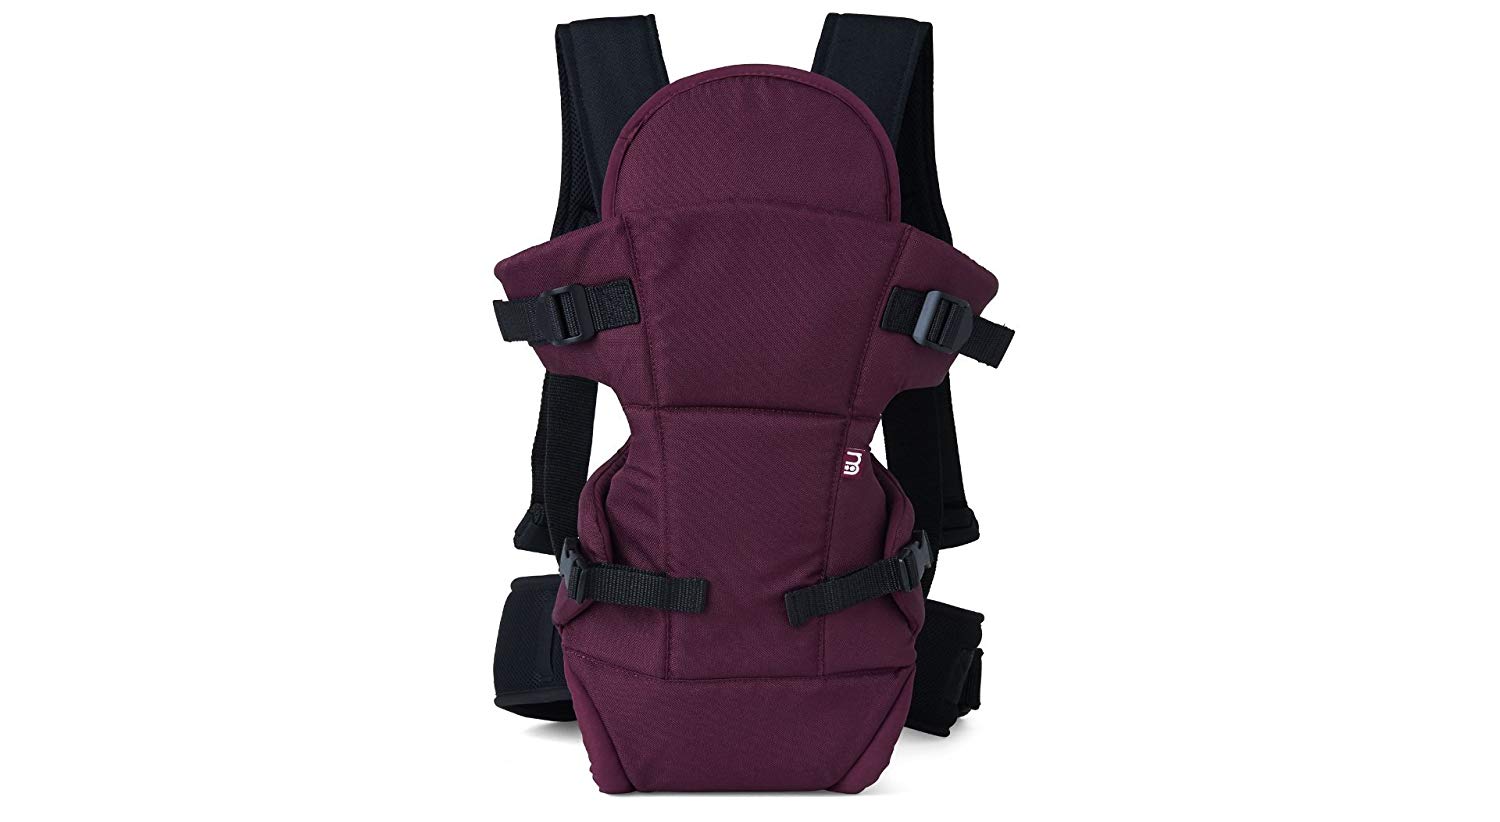 Mothercare Baby carrier with three positions (purple)